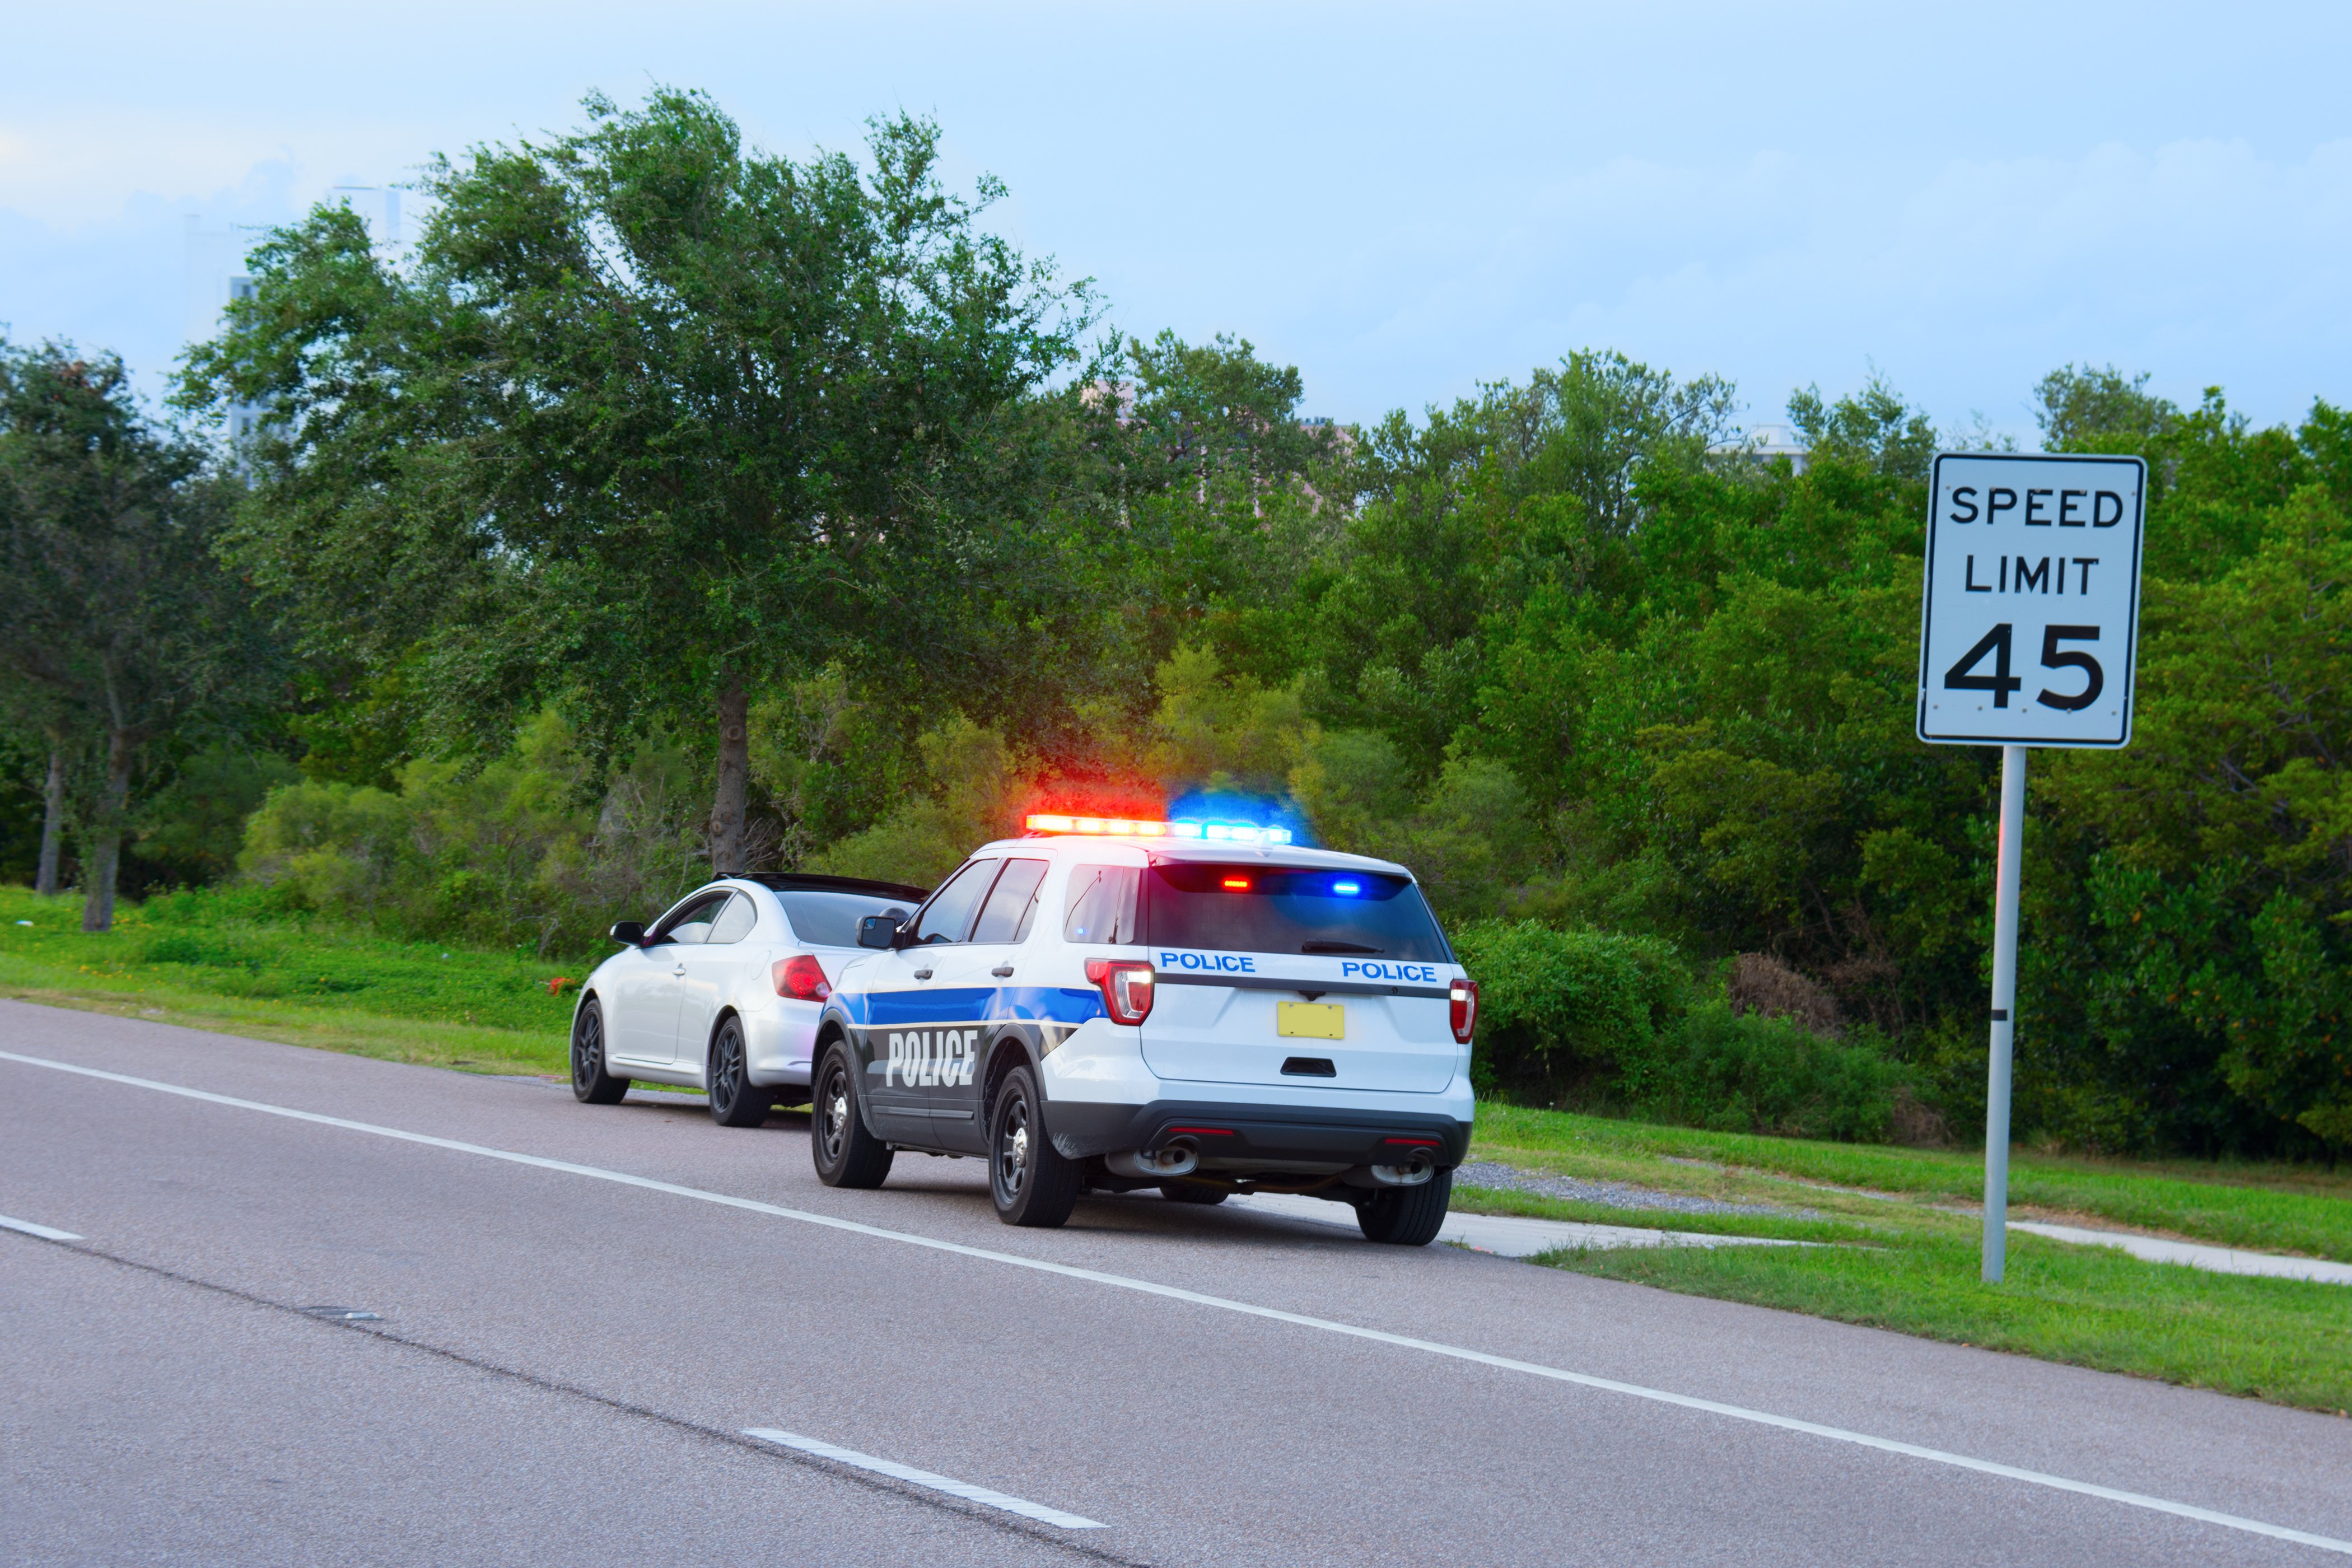 A police vehicle appears to be pulling a car over. | Photo; Shutterstock